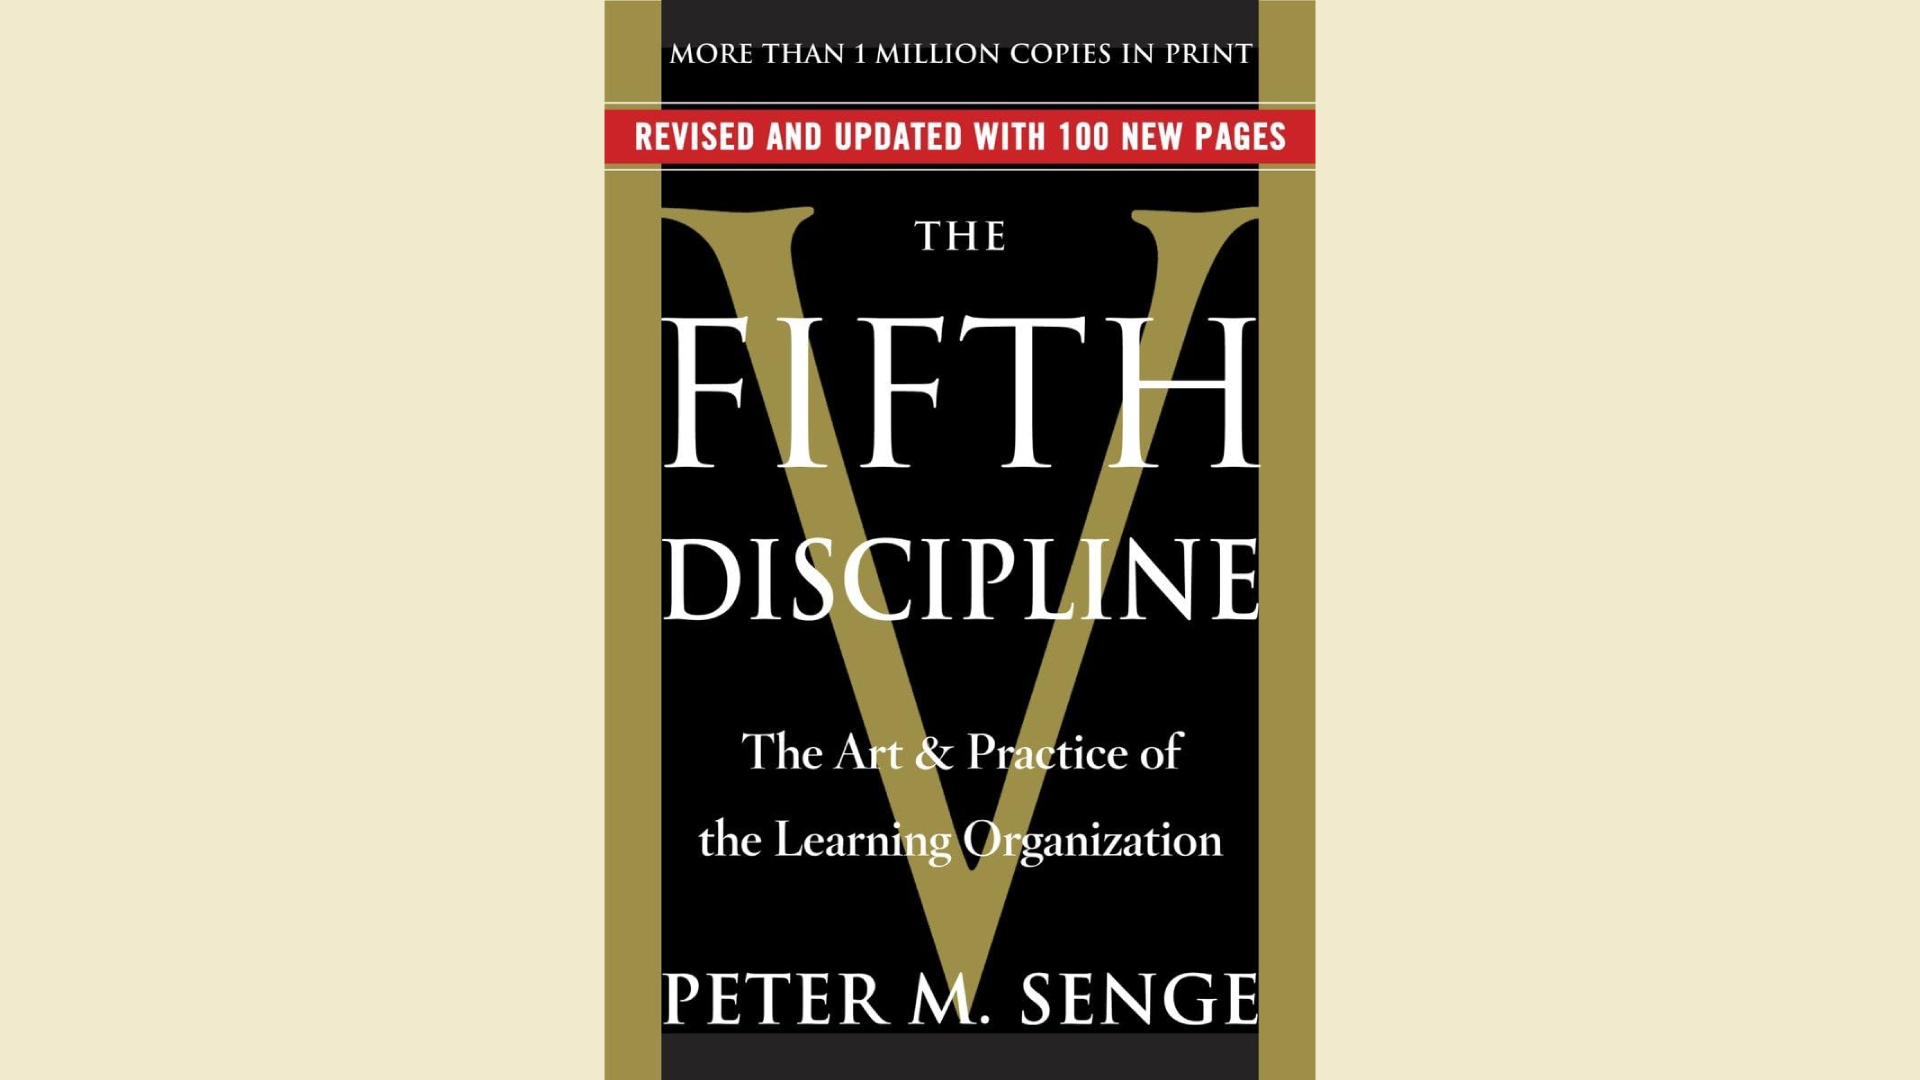 Summary: The Fifth Discipline by Peter Senge